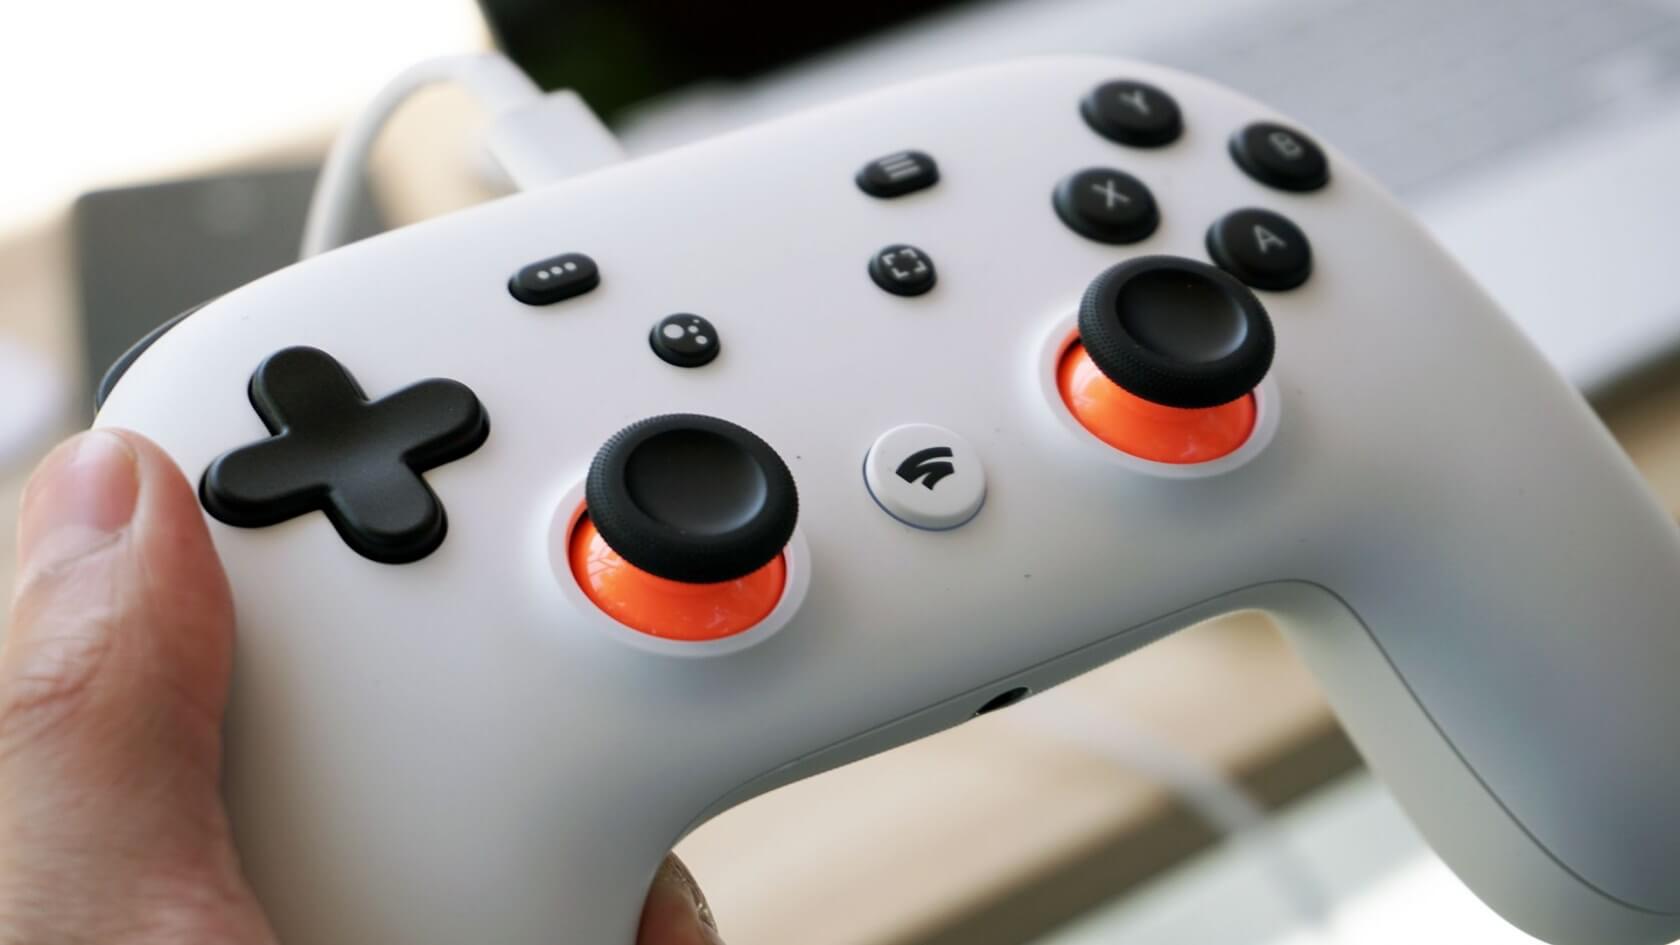 Google Stadia's pricing, exclusive game selection, and launch date will be revealed 'this summer'